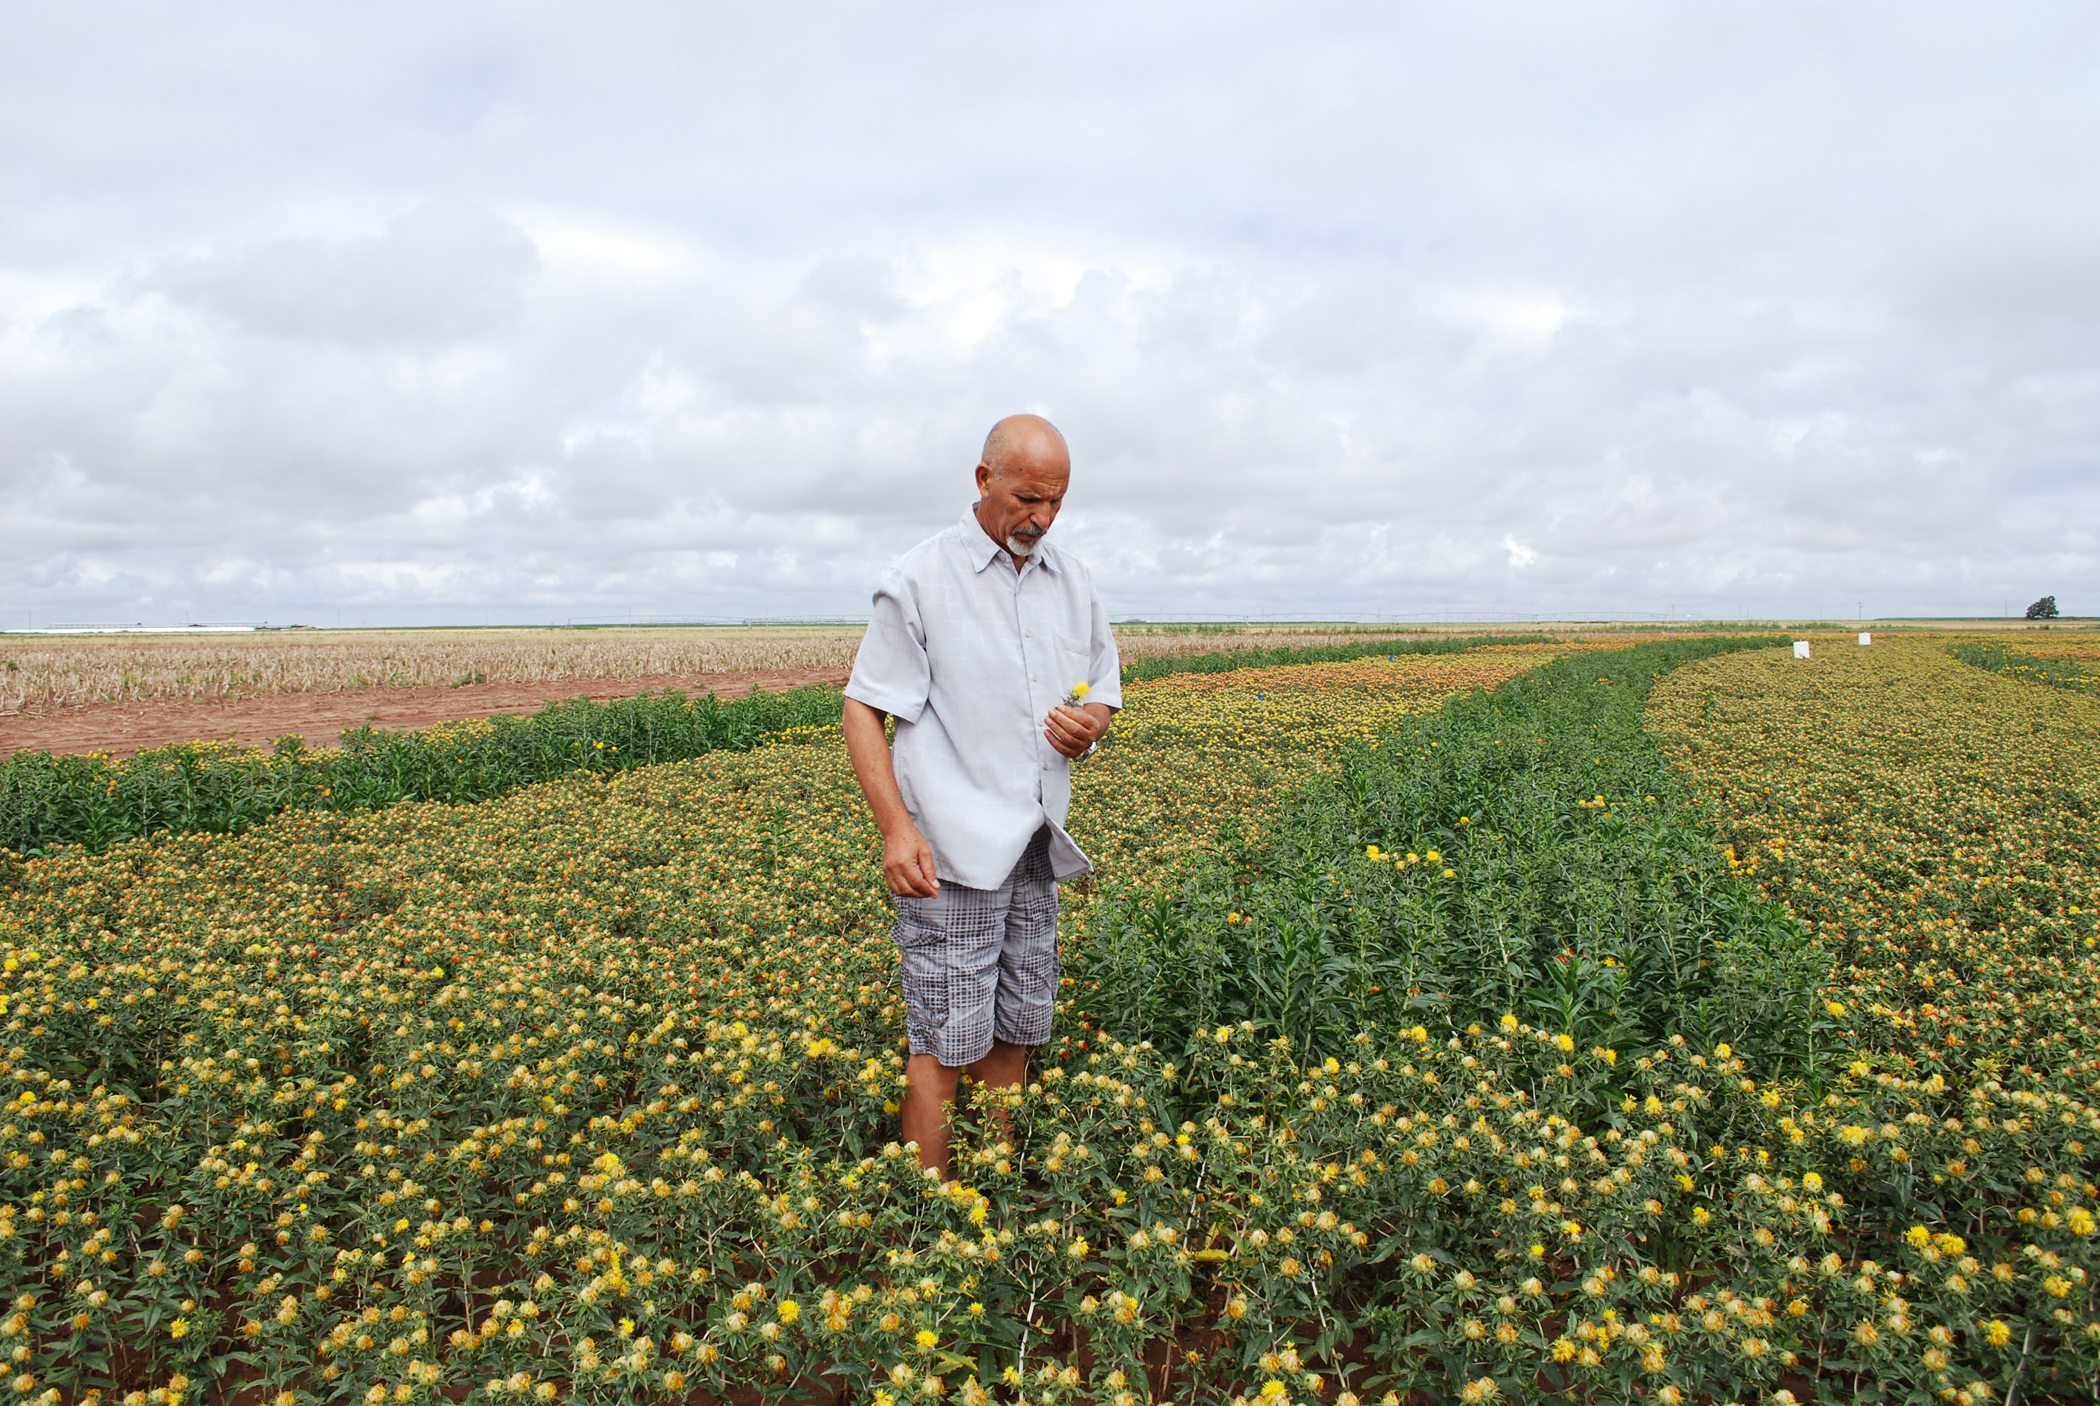 Abdel Mesbah, new superintendent of t NMSU's Agricultural Science Center at Clovis, stands in a safflower field where canola research is conducted.